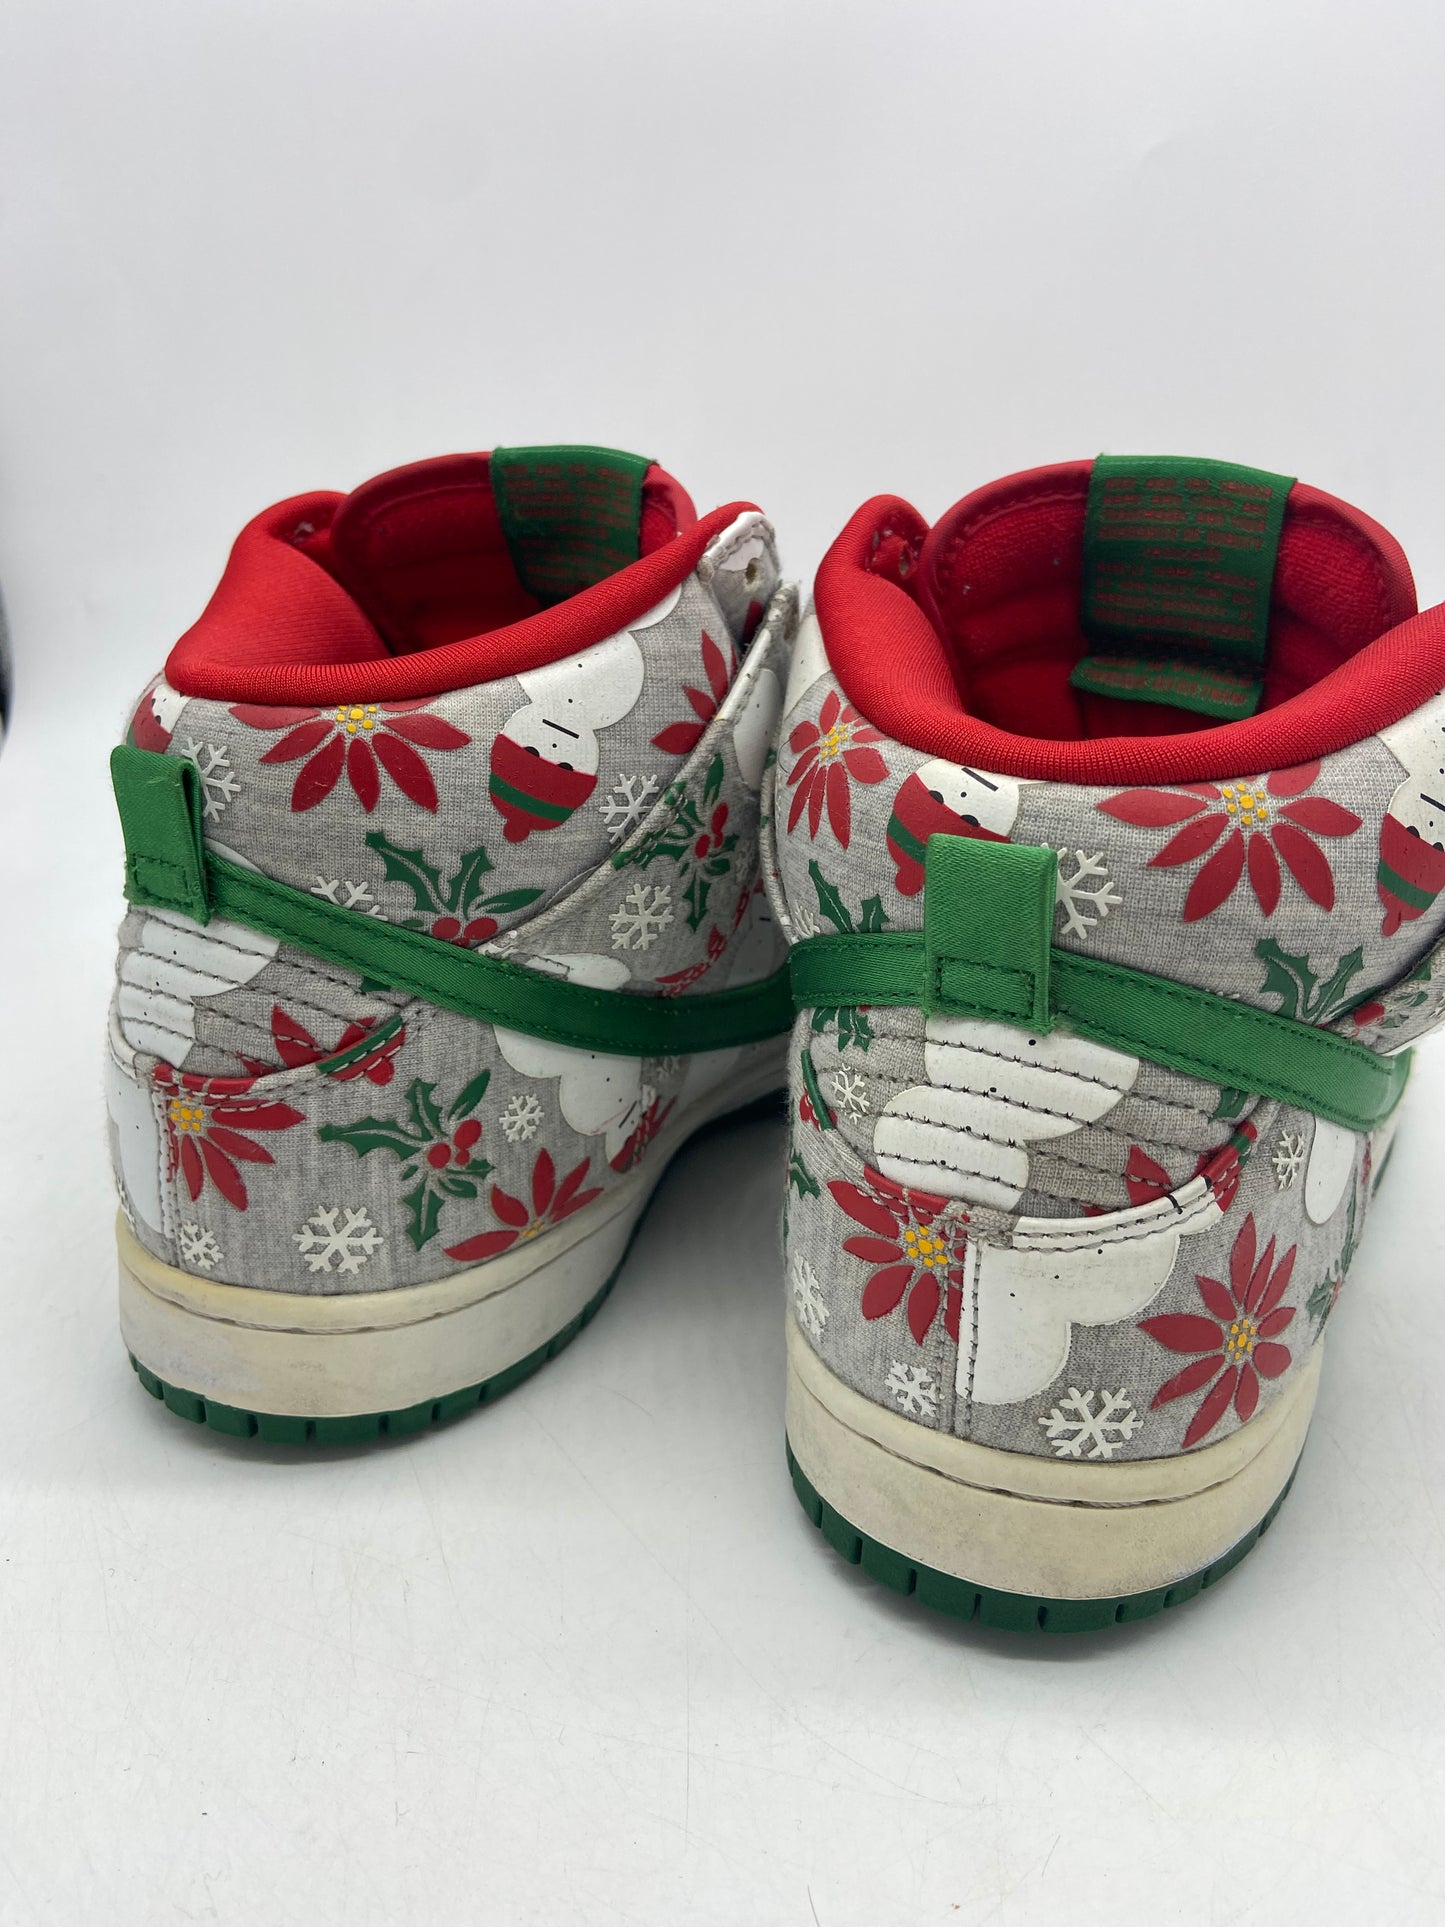 Preowned Nike SB Dunk High Concepts Ugly Christmas Sweater Grey Sz 9M/10.5W